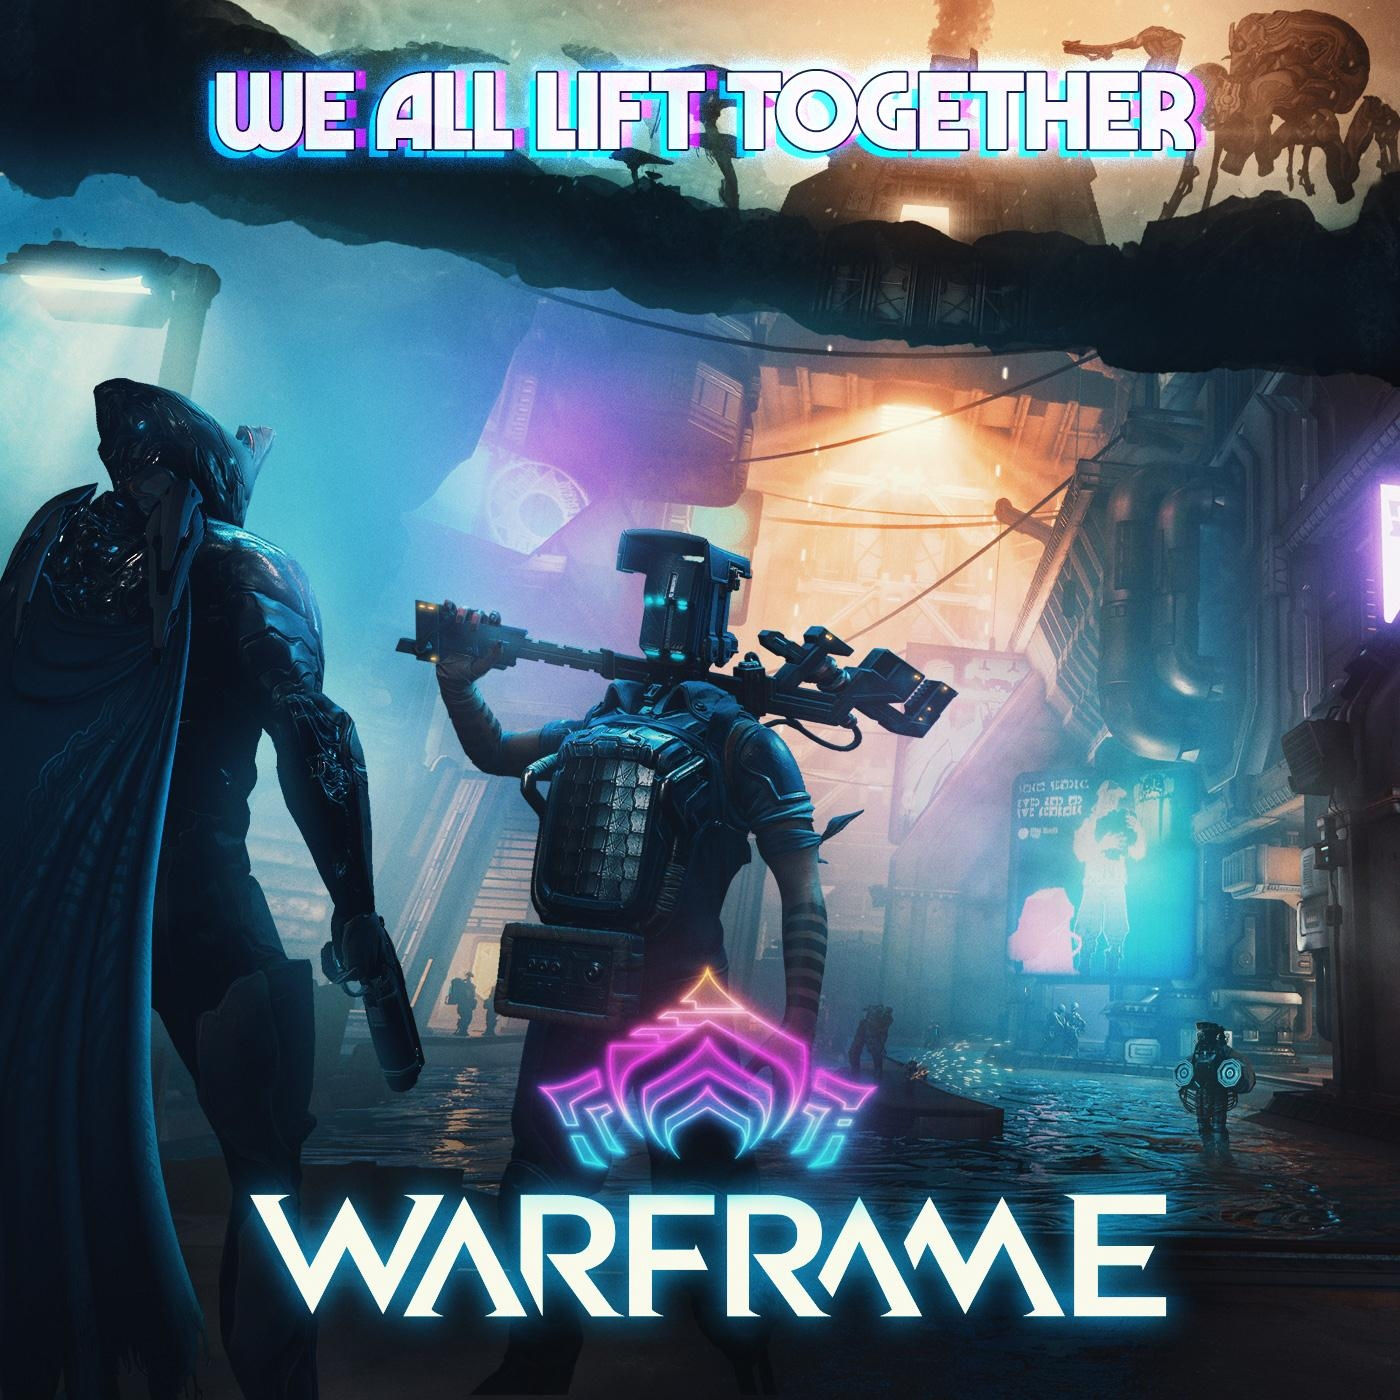 We all lift together from warframe keith power